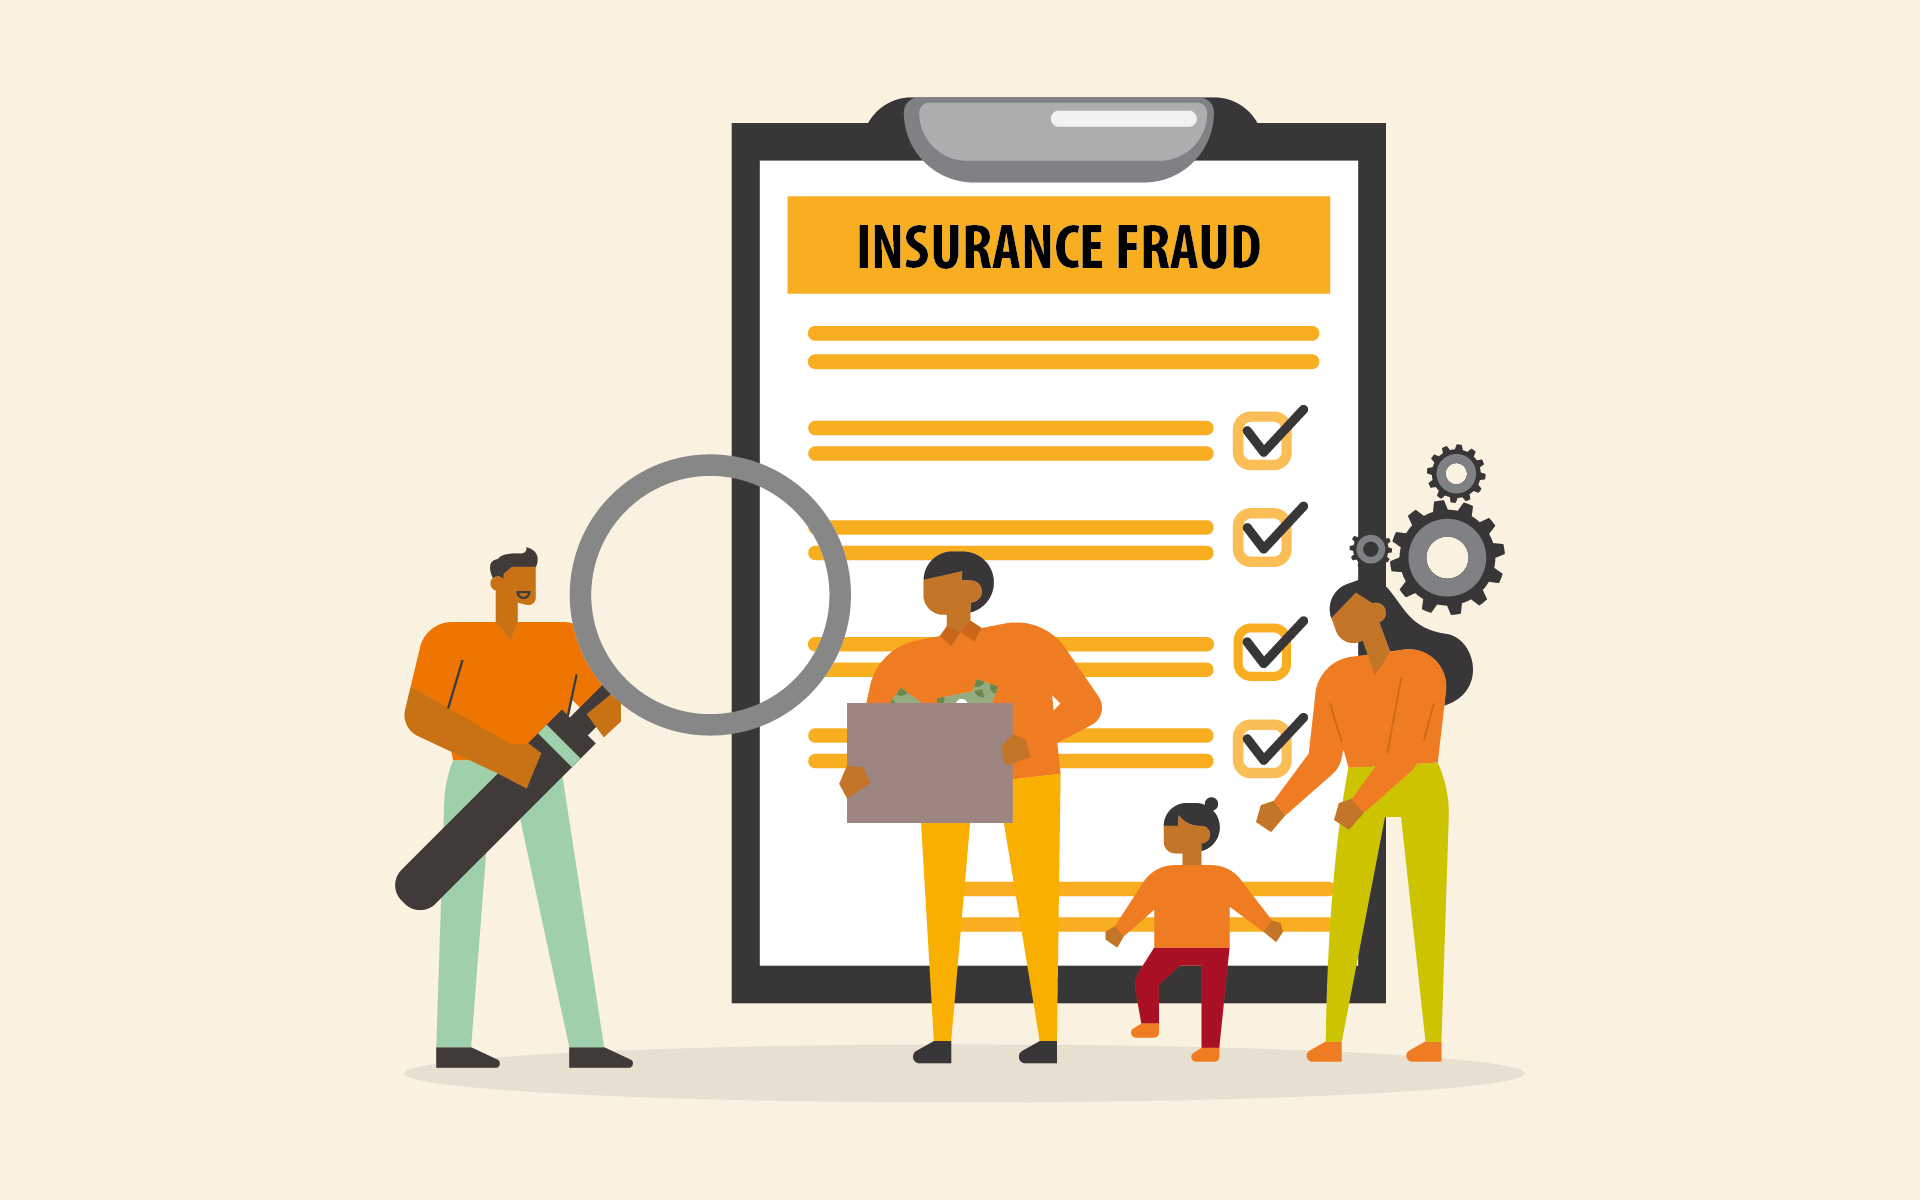 What you need to know about insurance fraud